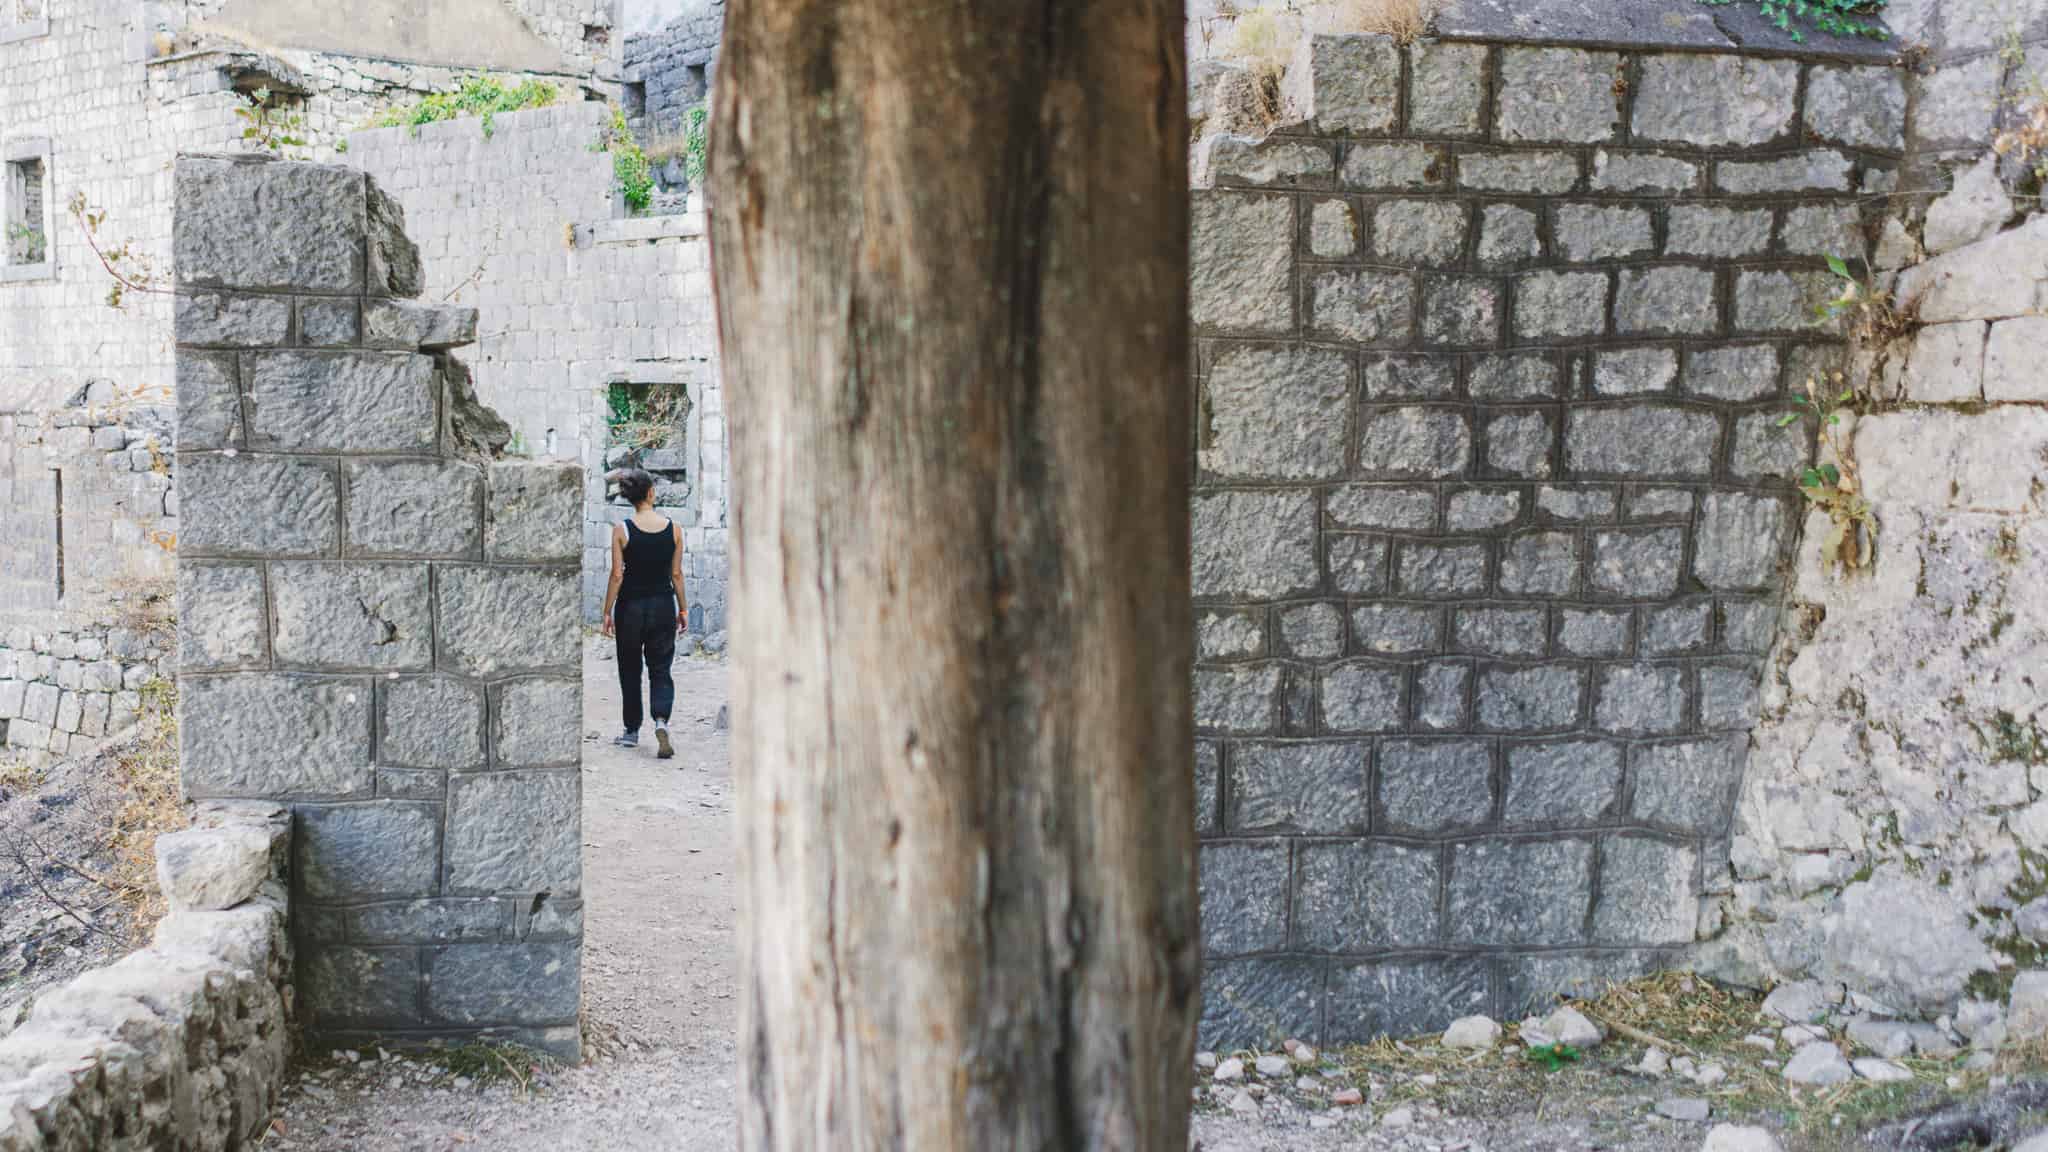 Walking through the ruins of the castle of San Giovanni after hiking the ladder of kotor in Montenegro